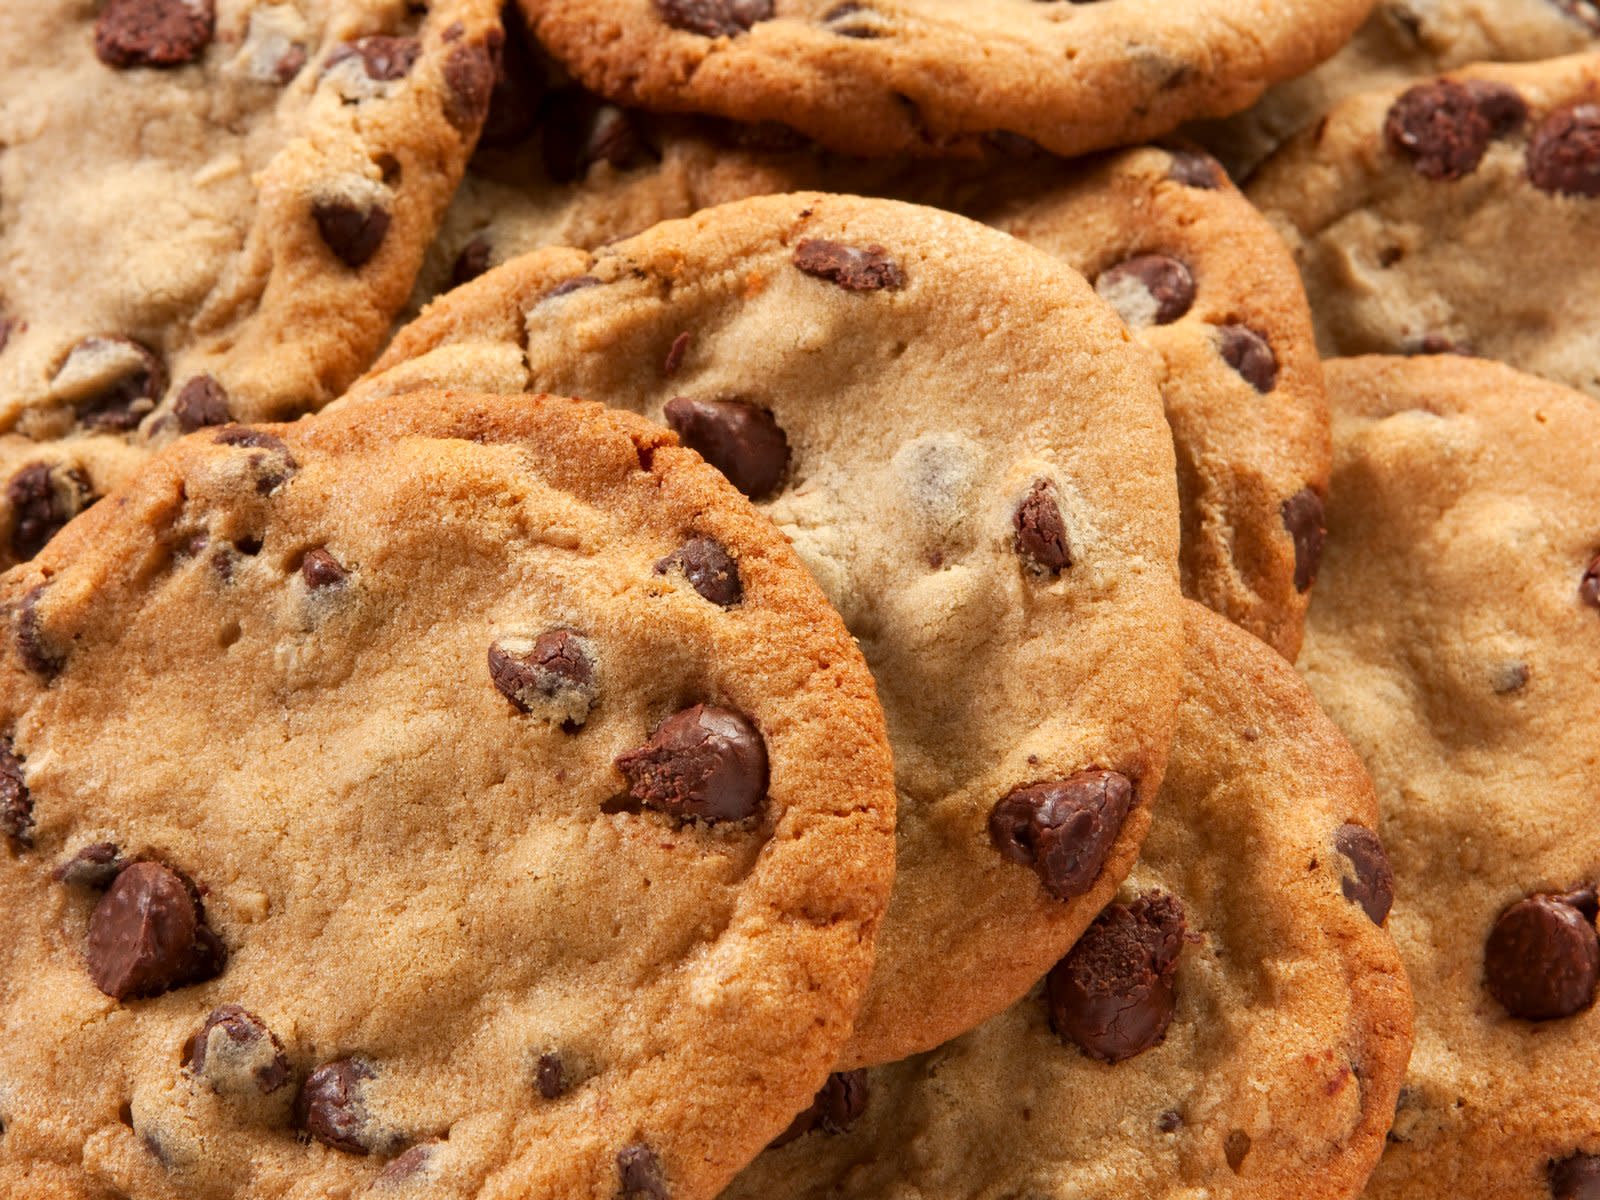 National Cookie Day 2019: Where to Get Deals and Free Cookies